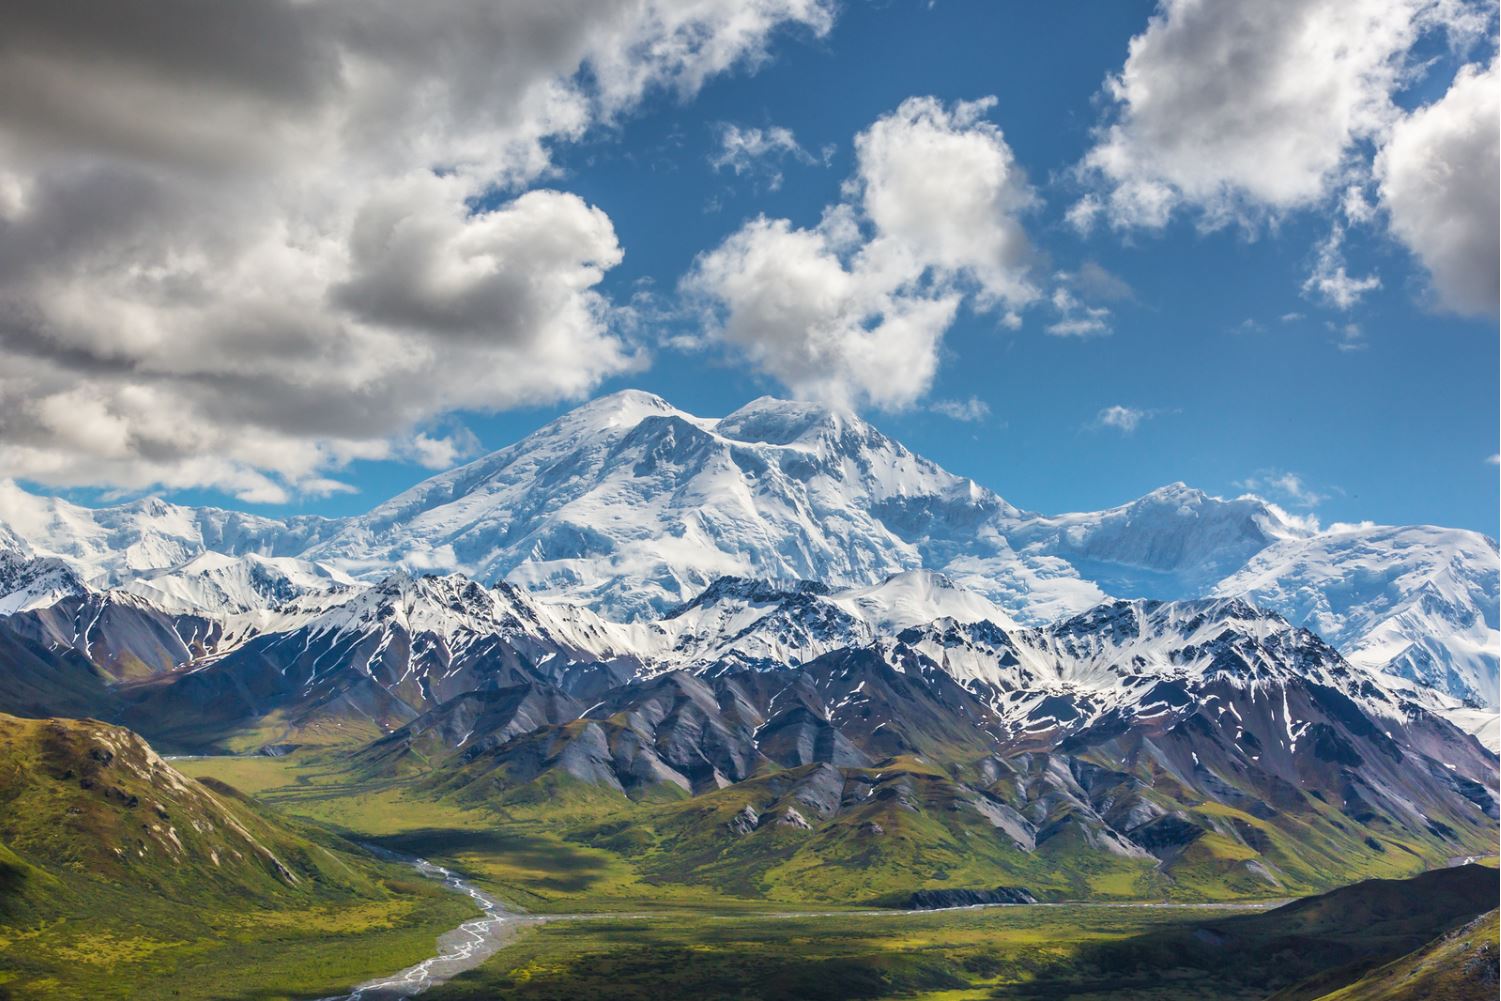 Mt. Foraker, at 17,400 feet, is located just 14 miles southwest of Mt. McKinley Denali National Park and Preserve. It's the second highest peak in the Alaska Range, and third highest in North America.